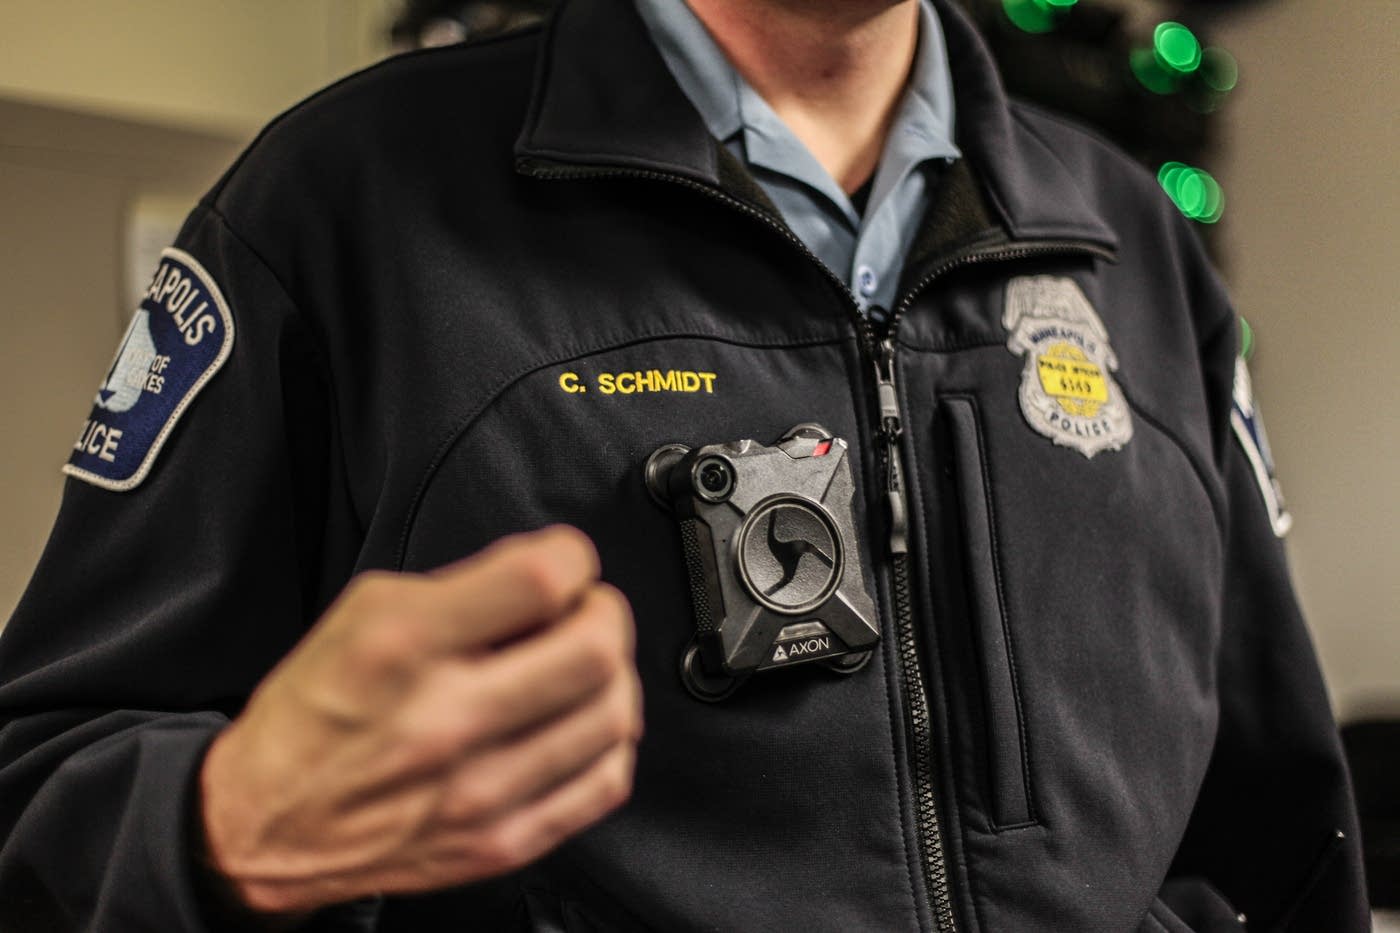 Seeing a dip in recordings, Minneapolis police aim to ...